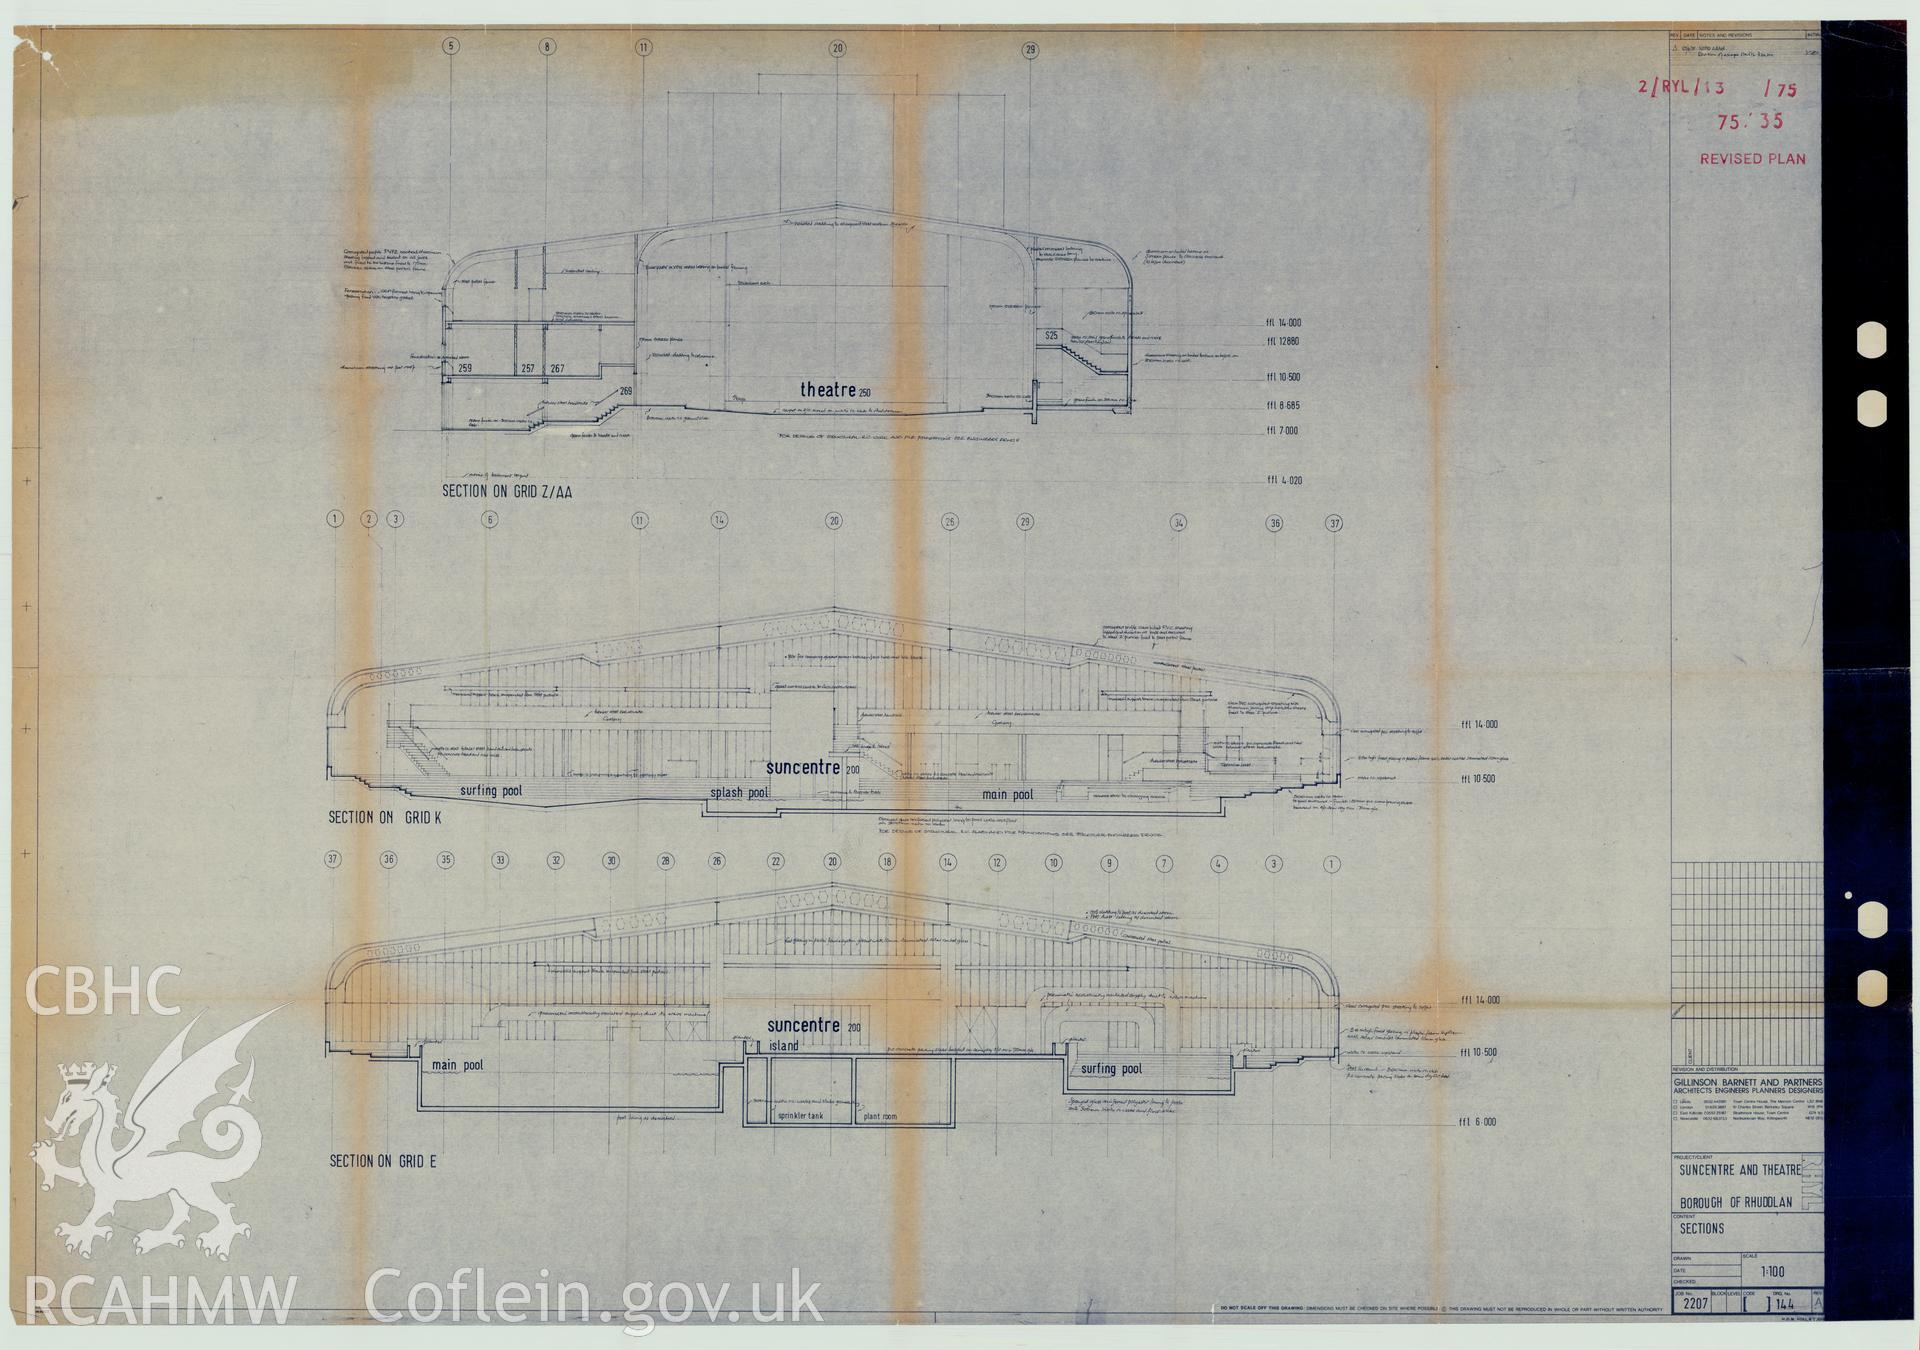 Digital copy of a measured drawing showing sections of the Sun Centre, Rhyl, produced by Gillinson Barnett and Partners. Loaned for copying by Denbighshire County Council.